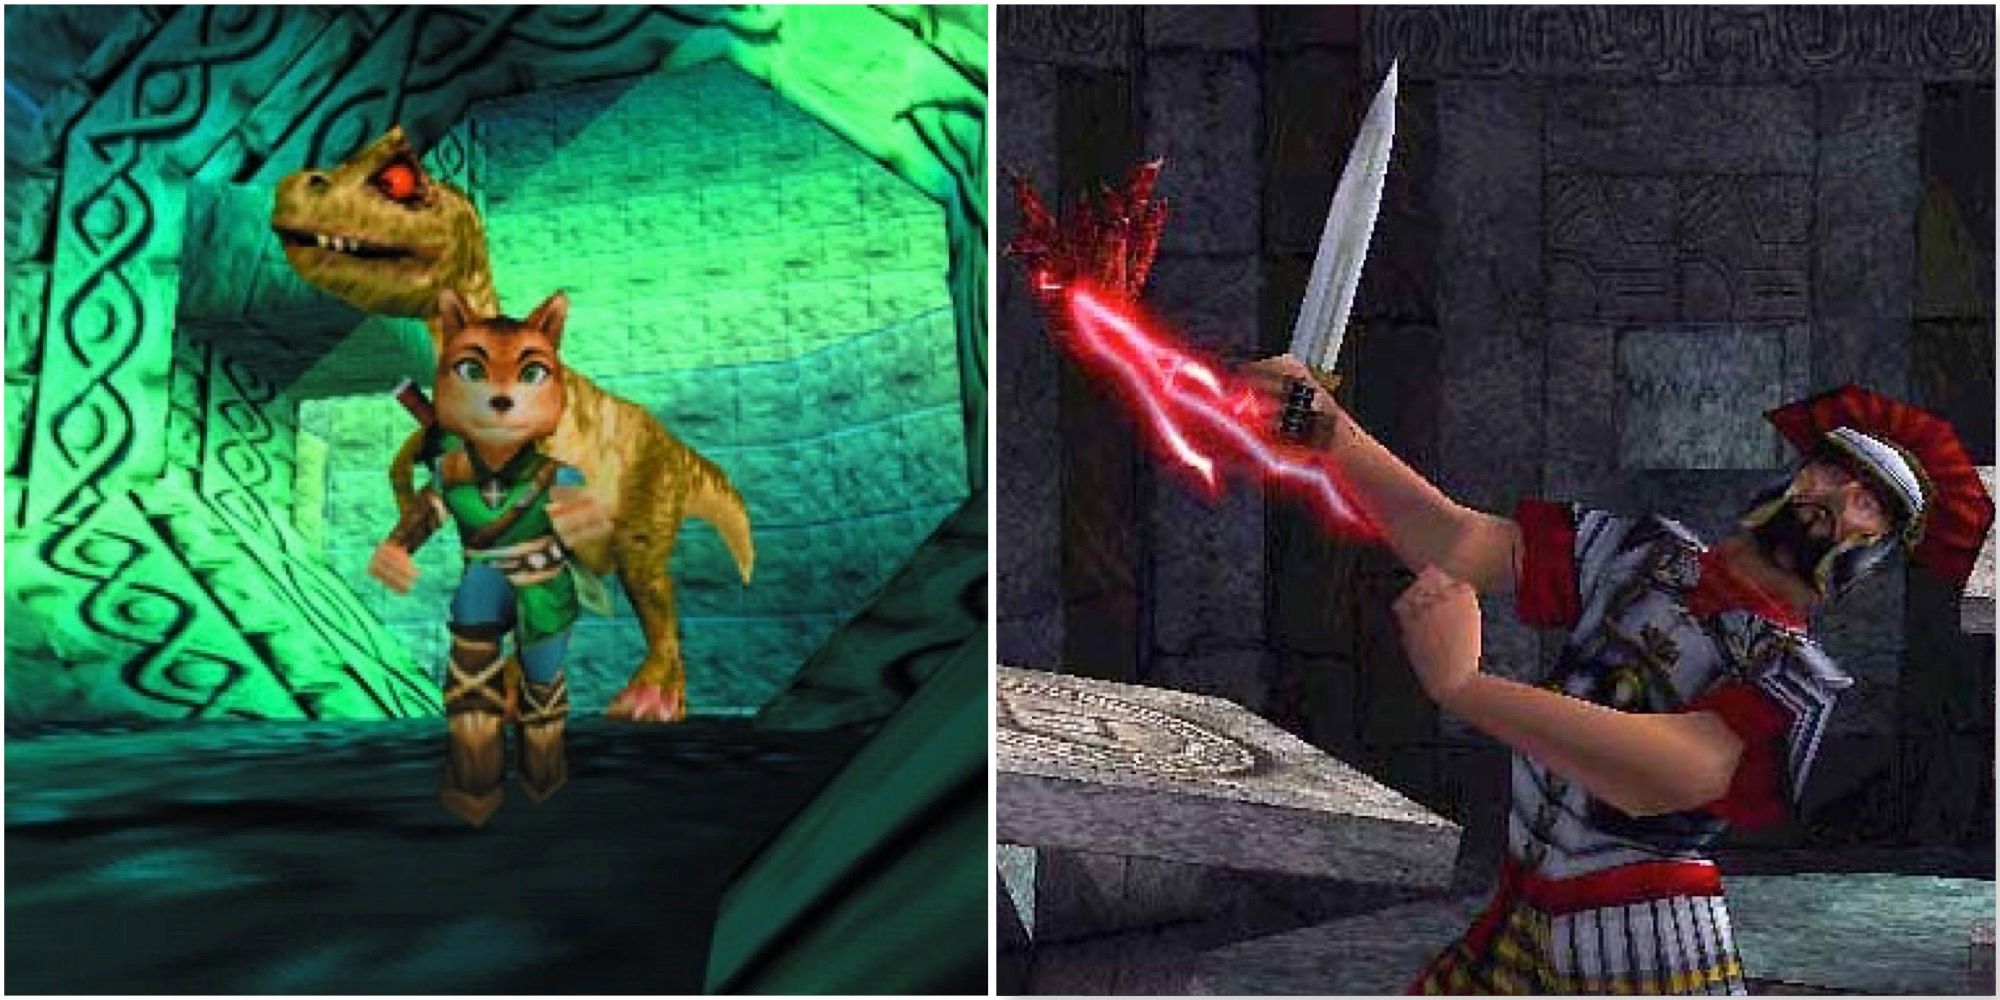 Star Fox Adventures prototype image from the N64 version and Eternal Darkness prototype image from the N64 version